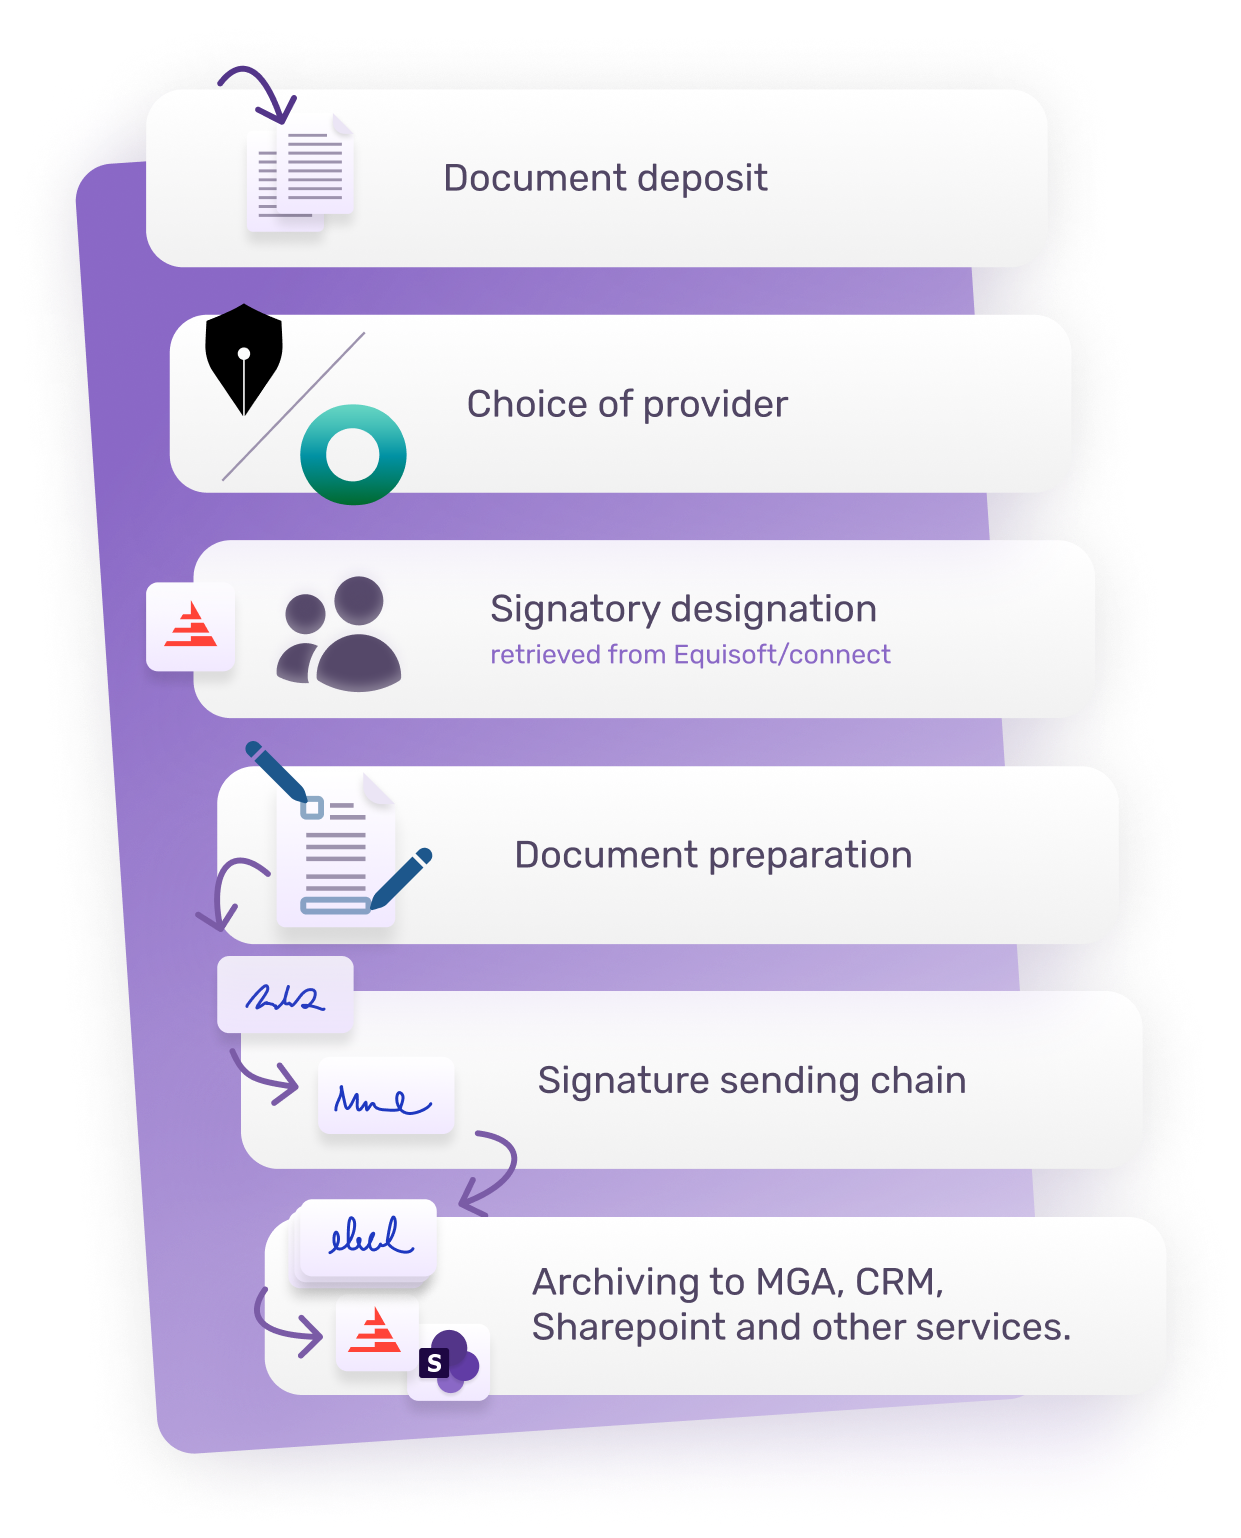 Representation of the document signature process: Document deposit, provider choice (Tchat N Sign or OneSpan), designating signatories retrieved from Equisoft/connect, document preparation, signature sending chain, and finally archiving to MGA, CRM, Sharepoint and other services.